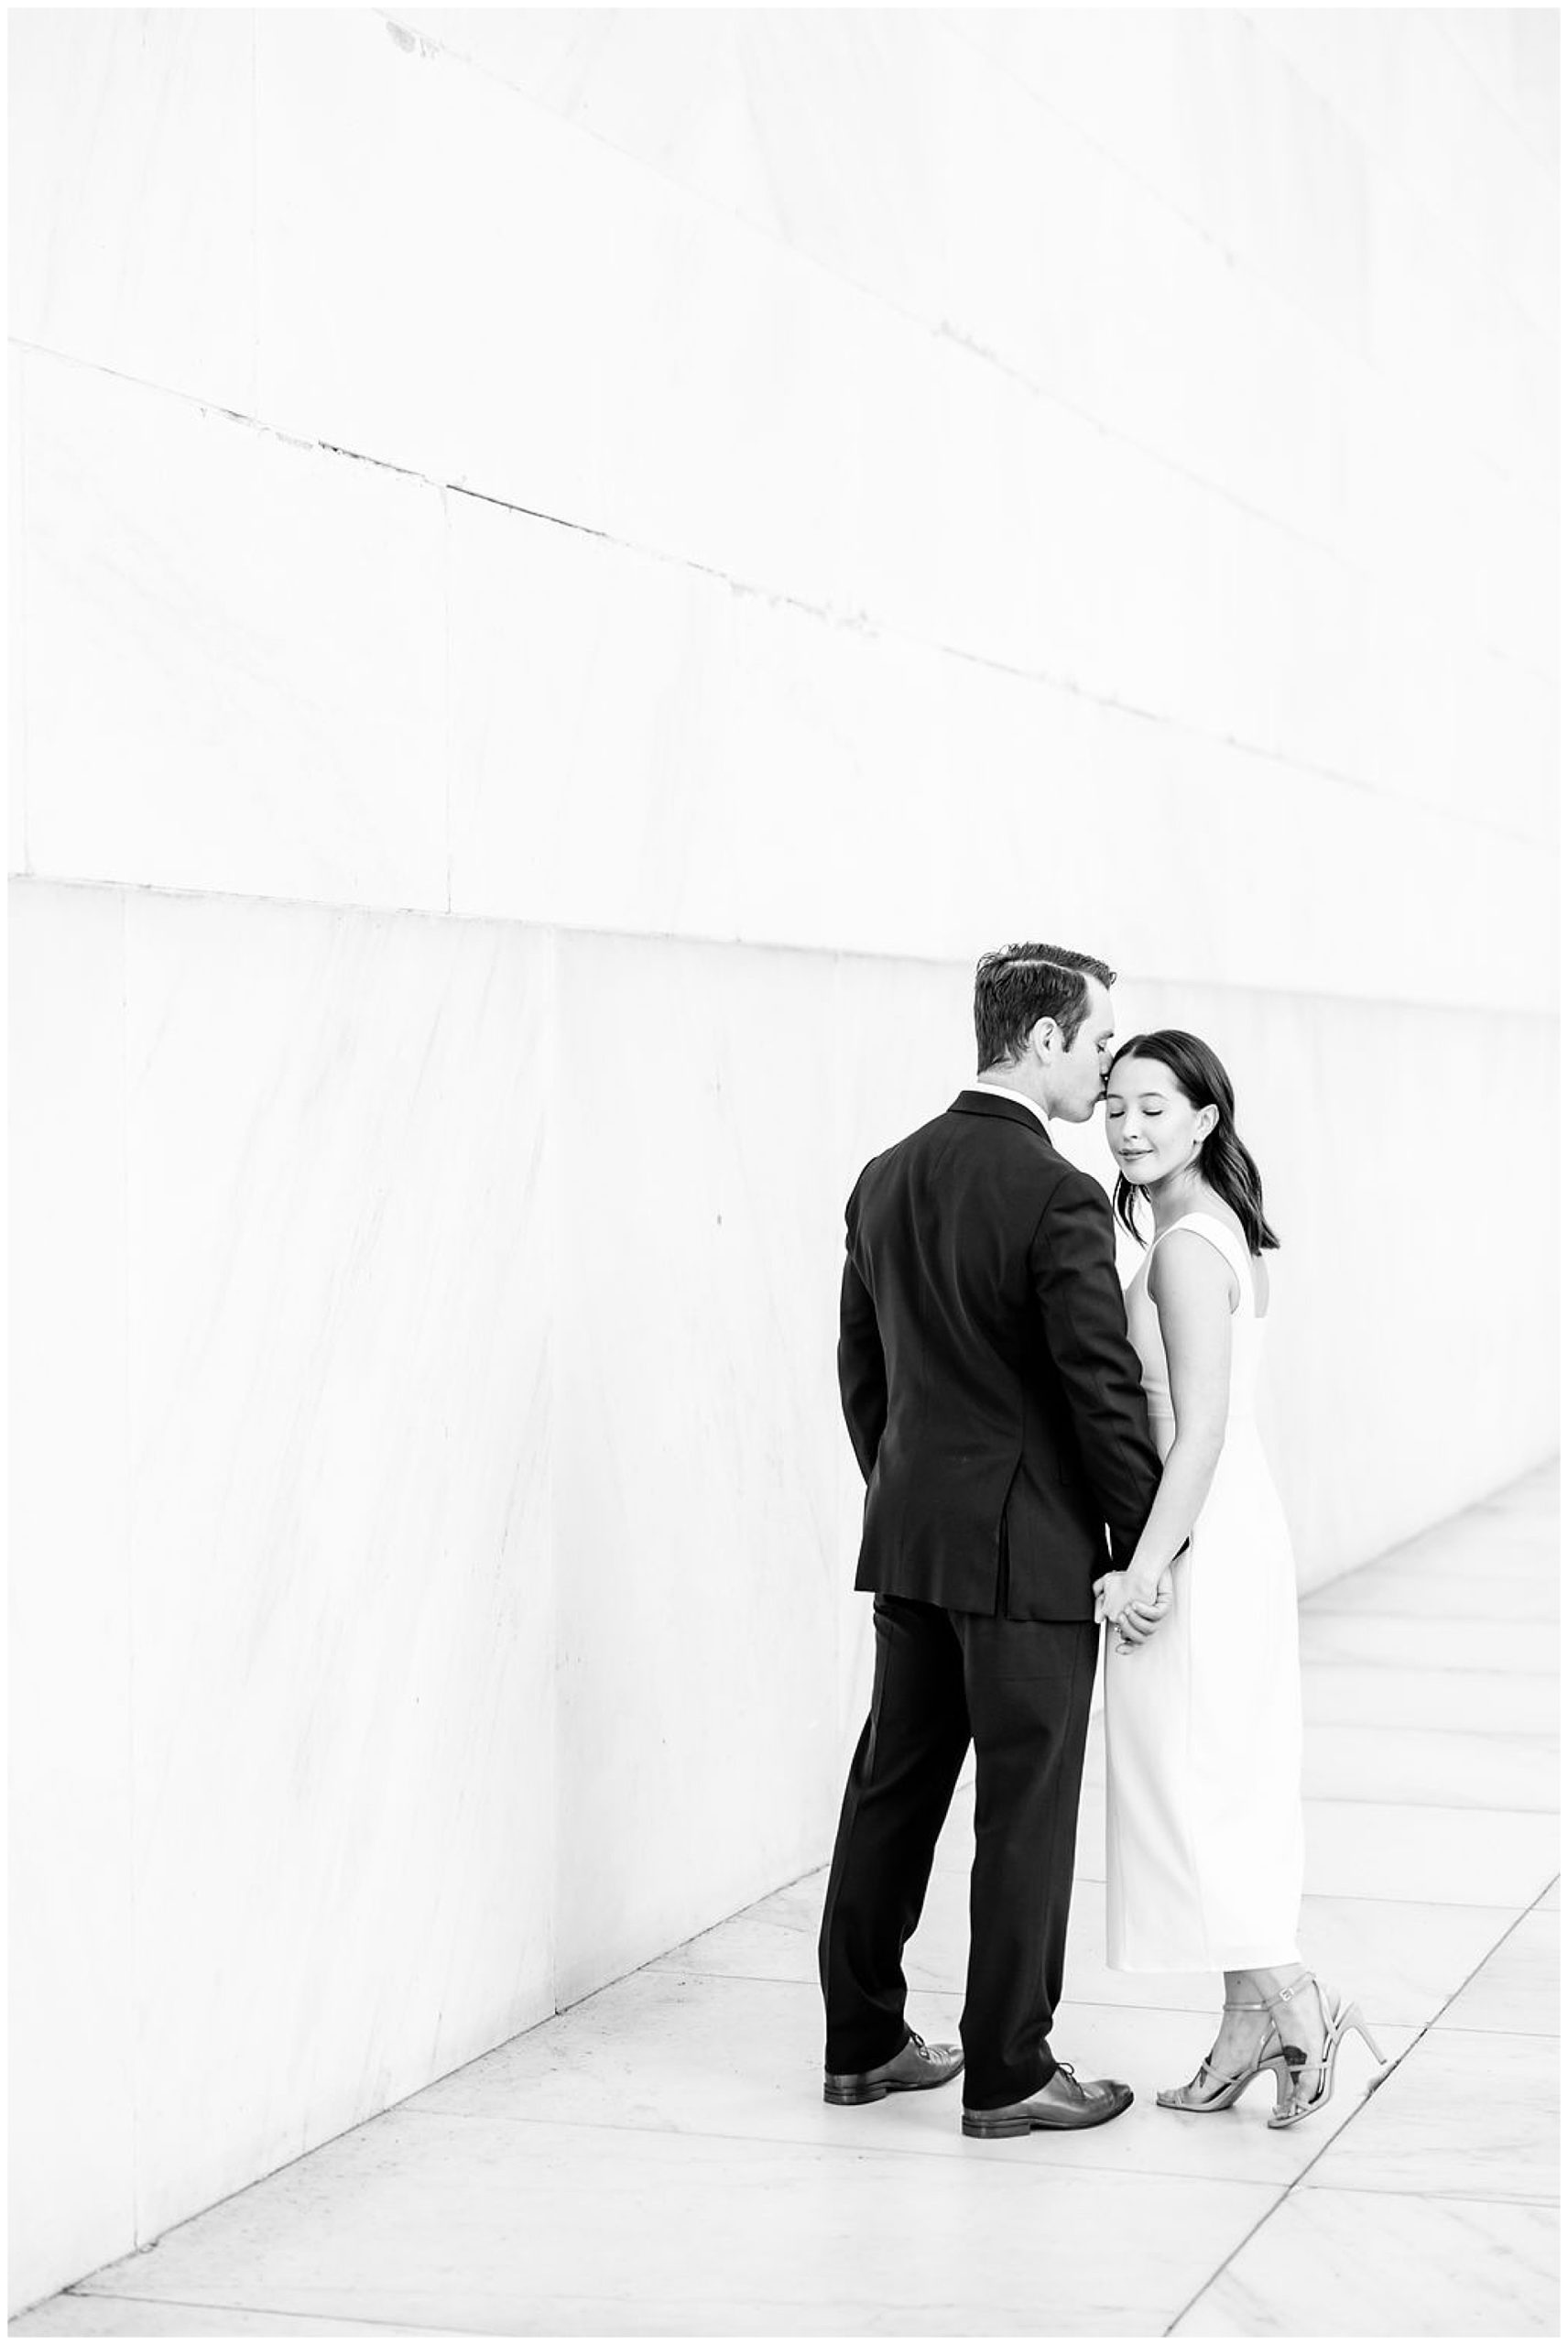 pink sunrise Lincoln Memorial engagement, DC engagement session, DC engagement photographer, formal DC engagement photos, DC elopement photographer, DC wedding photographer, classic DC engagement photos, luxury DC engagement photographer, Rachel E.H. Photography, black and white, man kissing woman's forehead